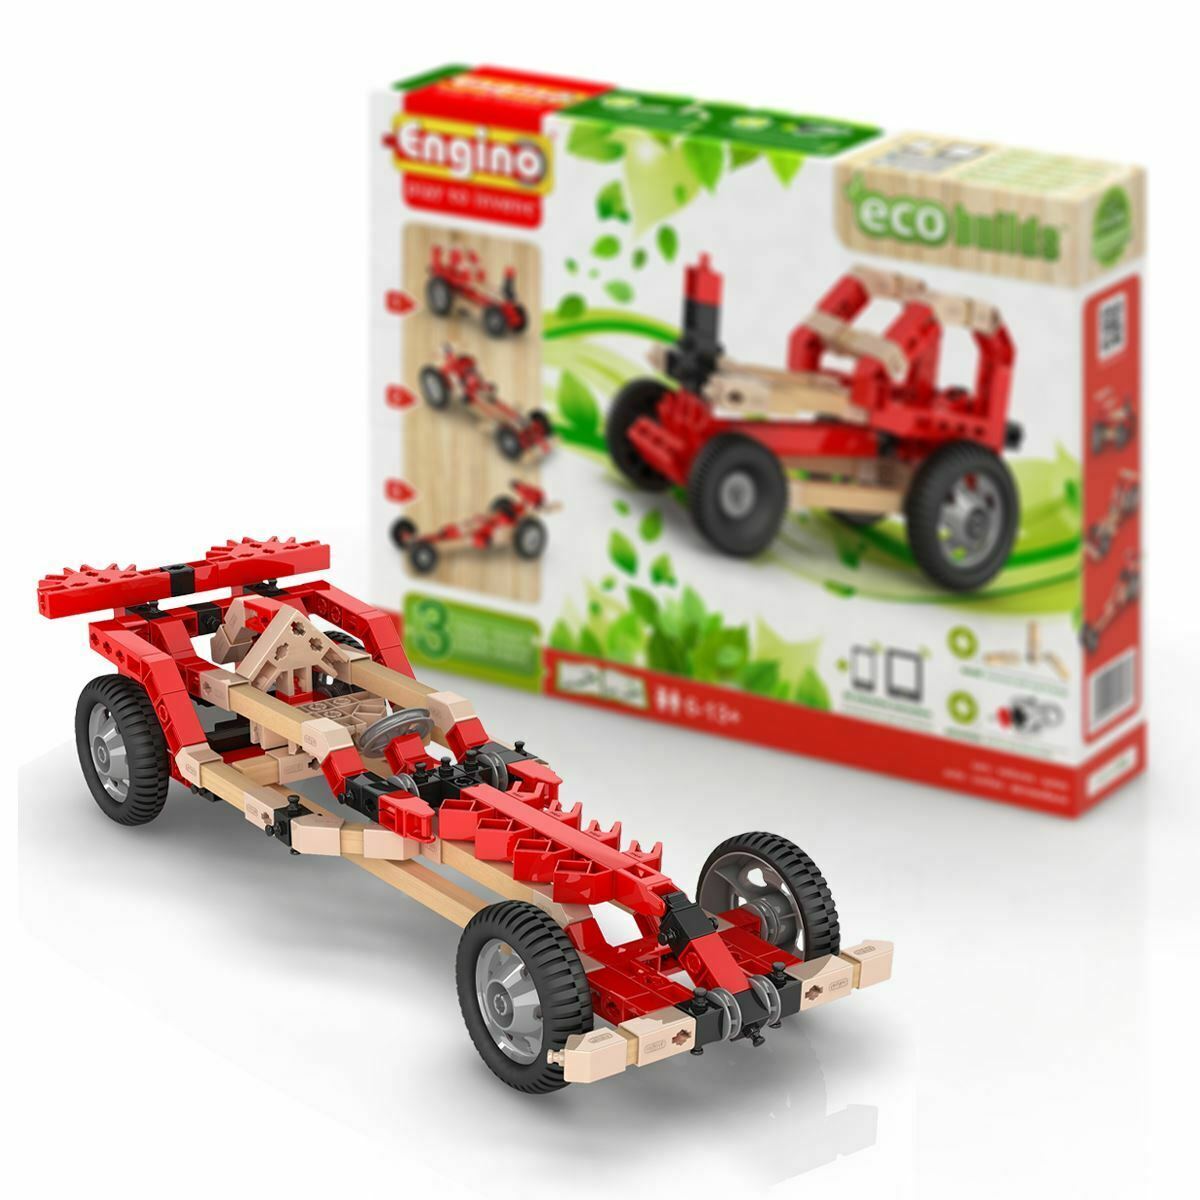 Engino Eco Builds 3 Model Cars Building Construction Creative Official